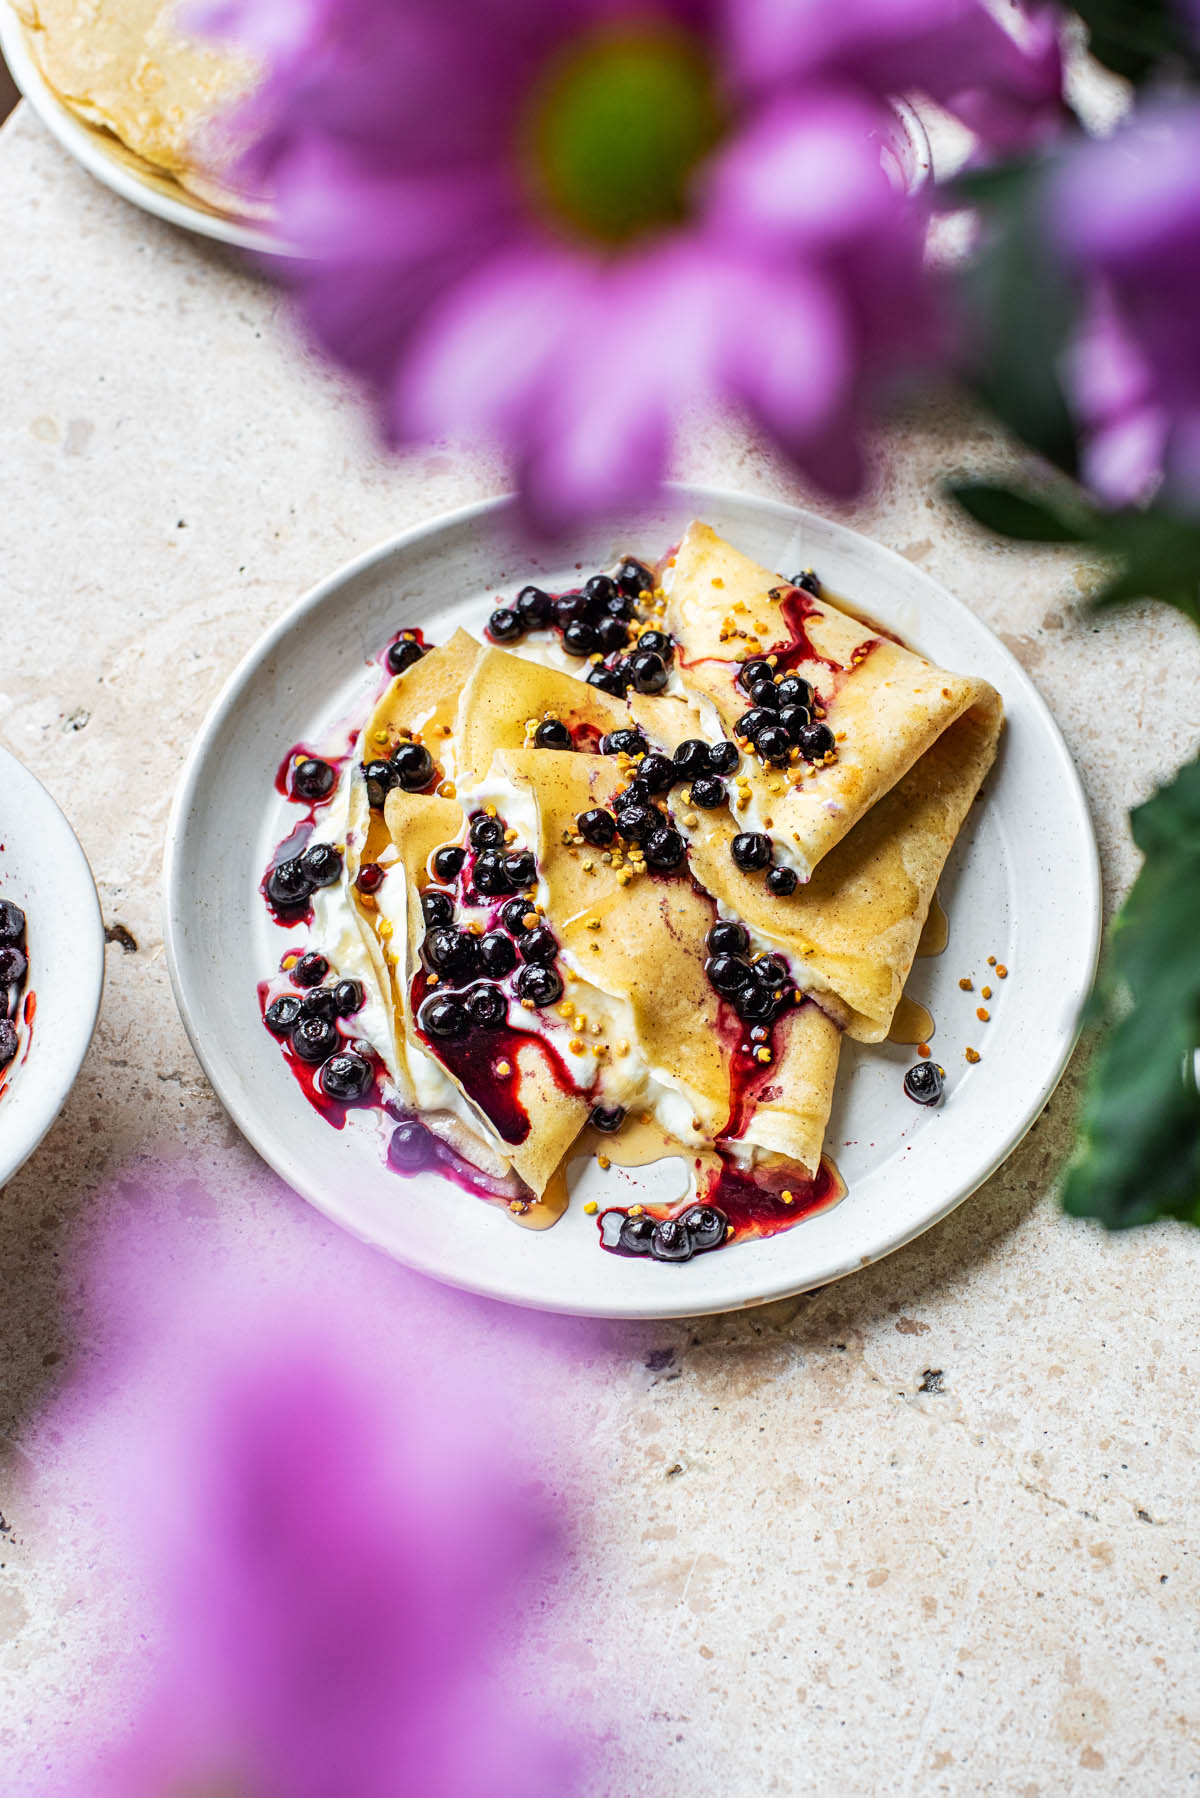 Crepes with yogurt and berries, flowers in front.